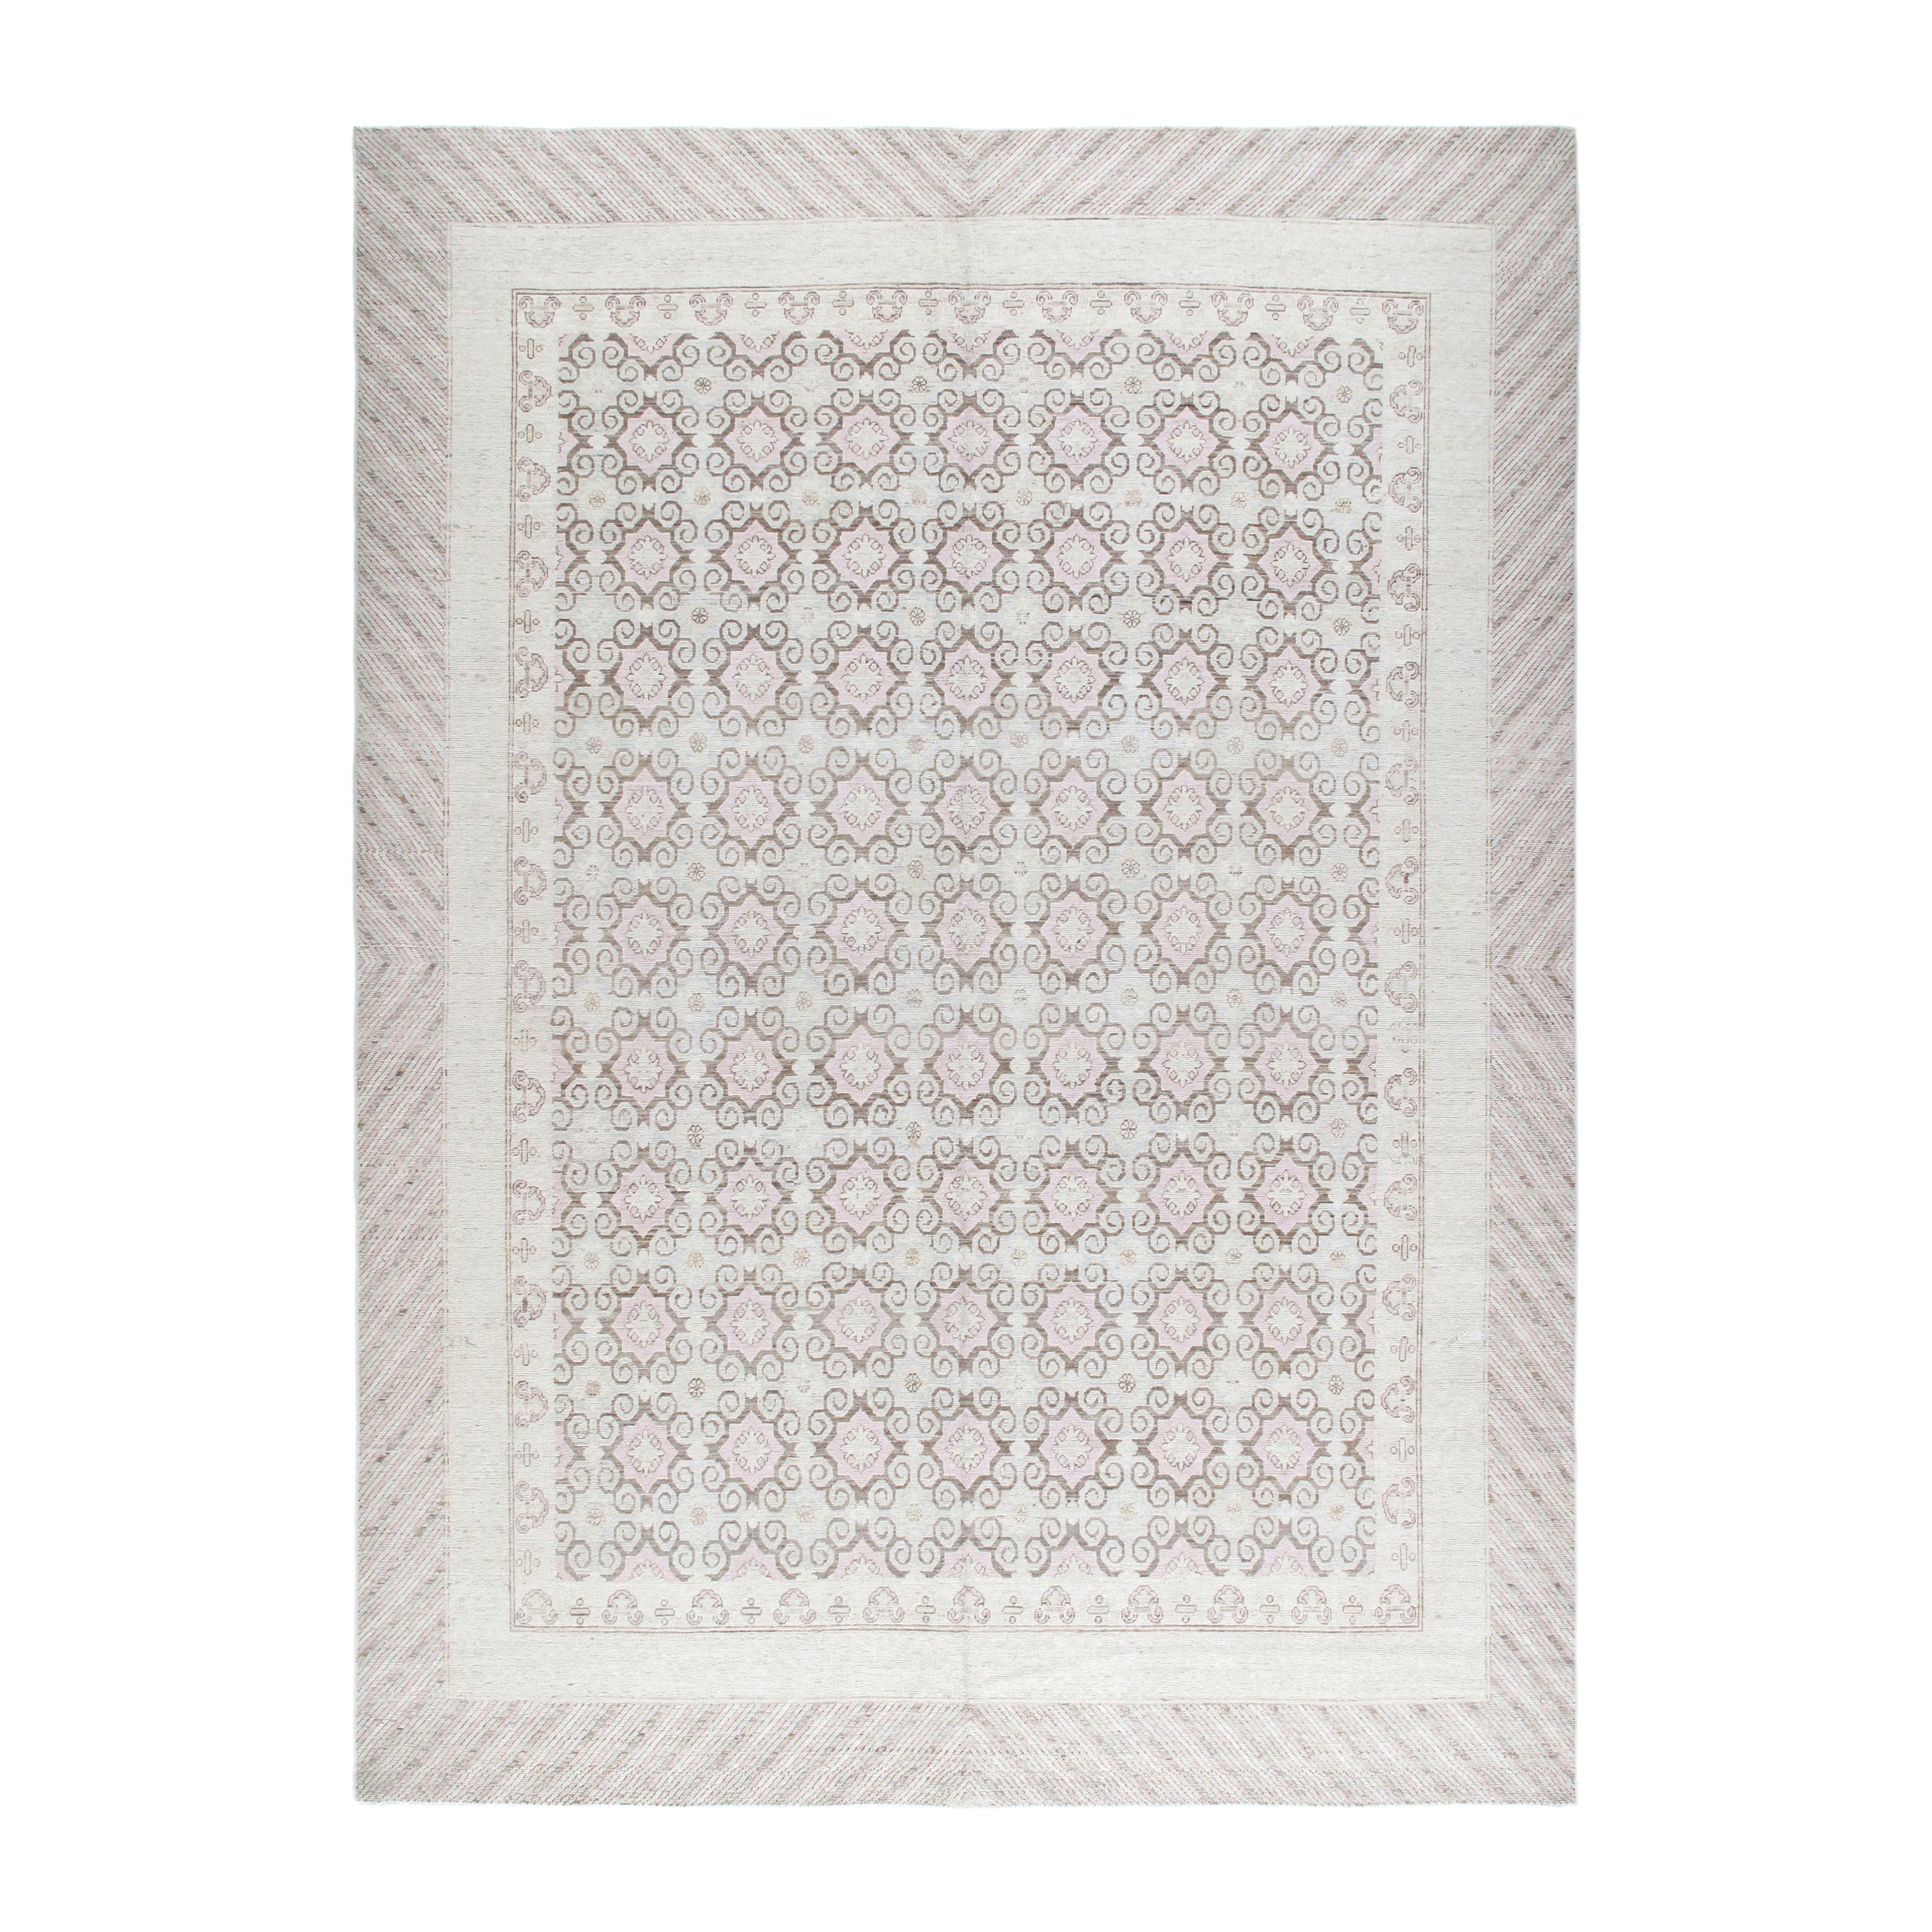 This modern geometric rug is hand-knotted with 100% hand spun wool. With the use of all natural vegetable dyes, we have created the perfect neutral cocoa palete, acting as a transitional piece. 